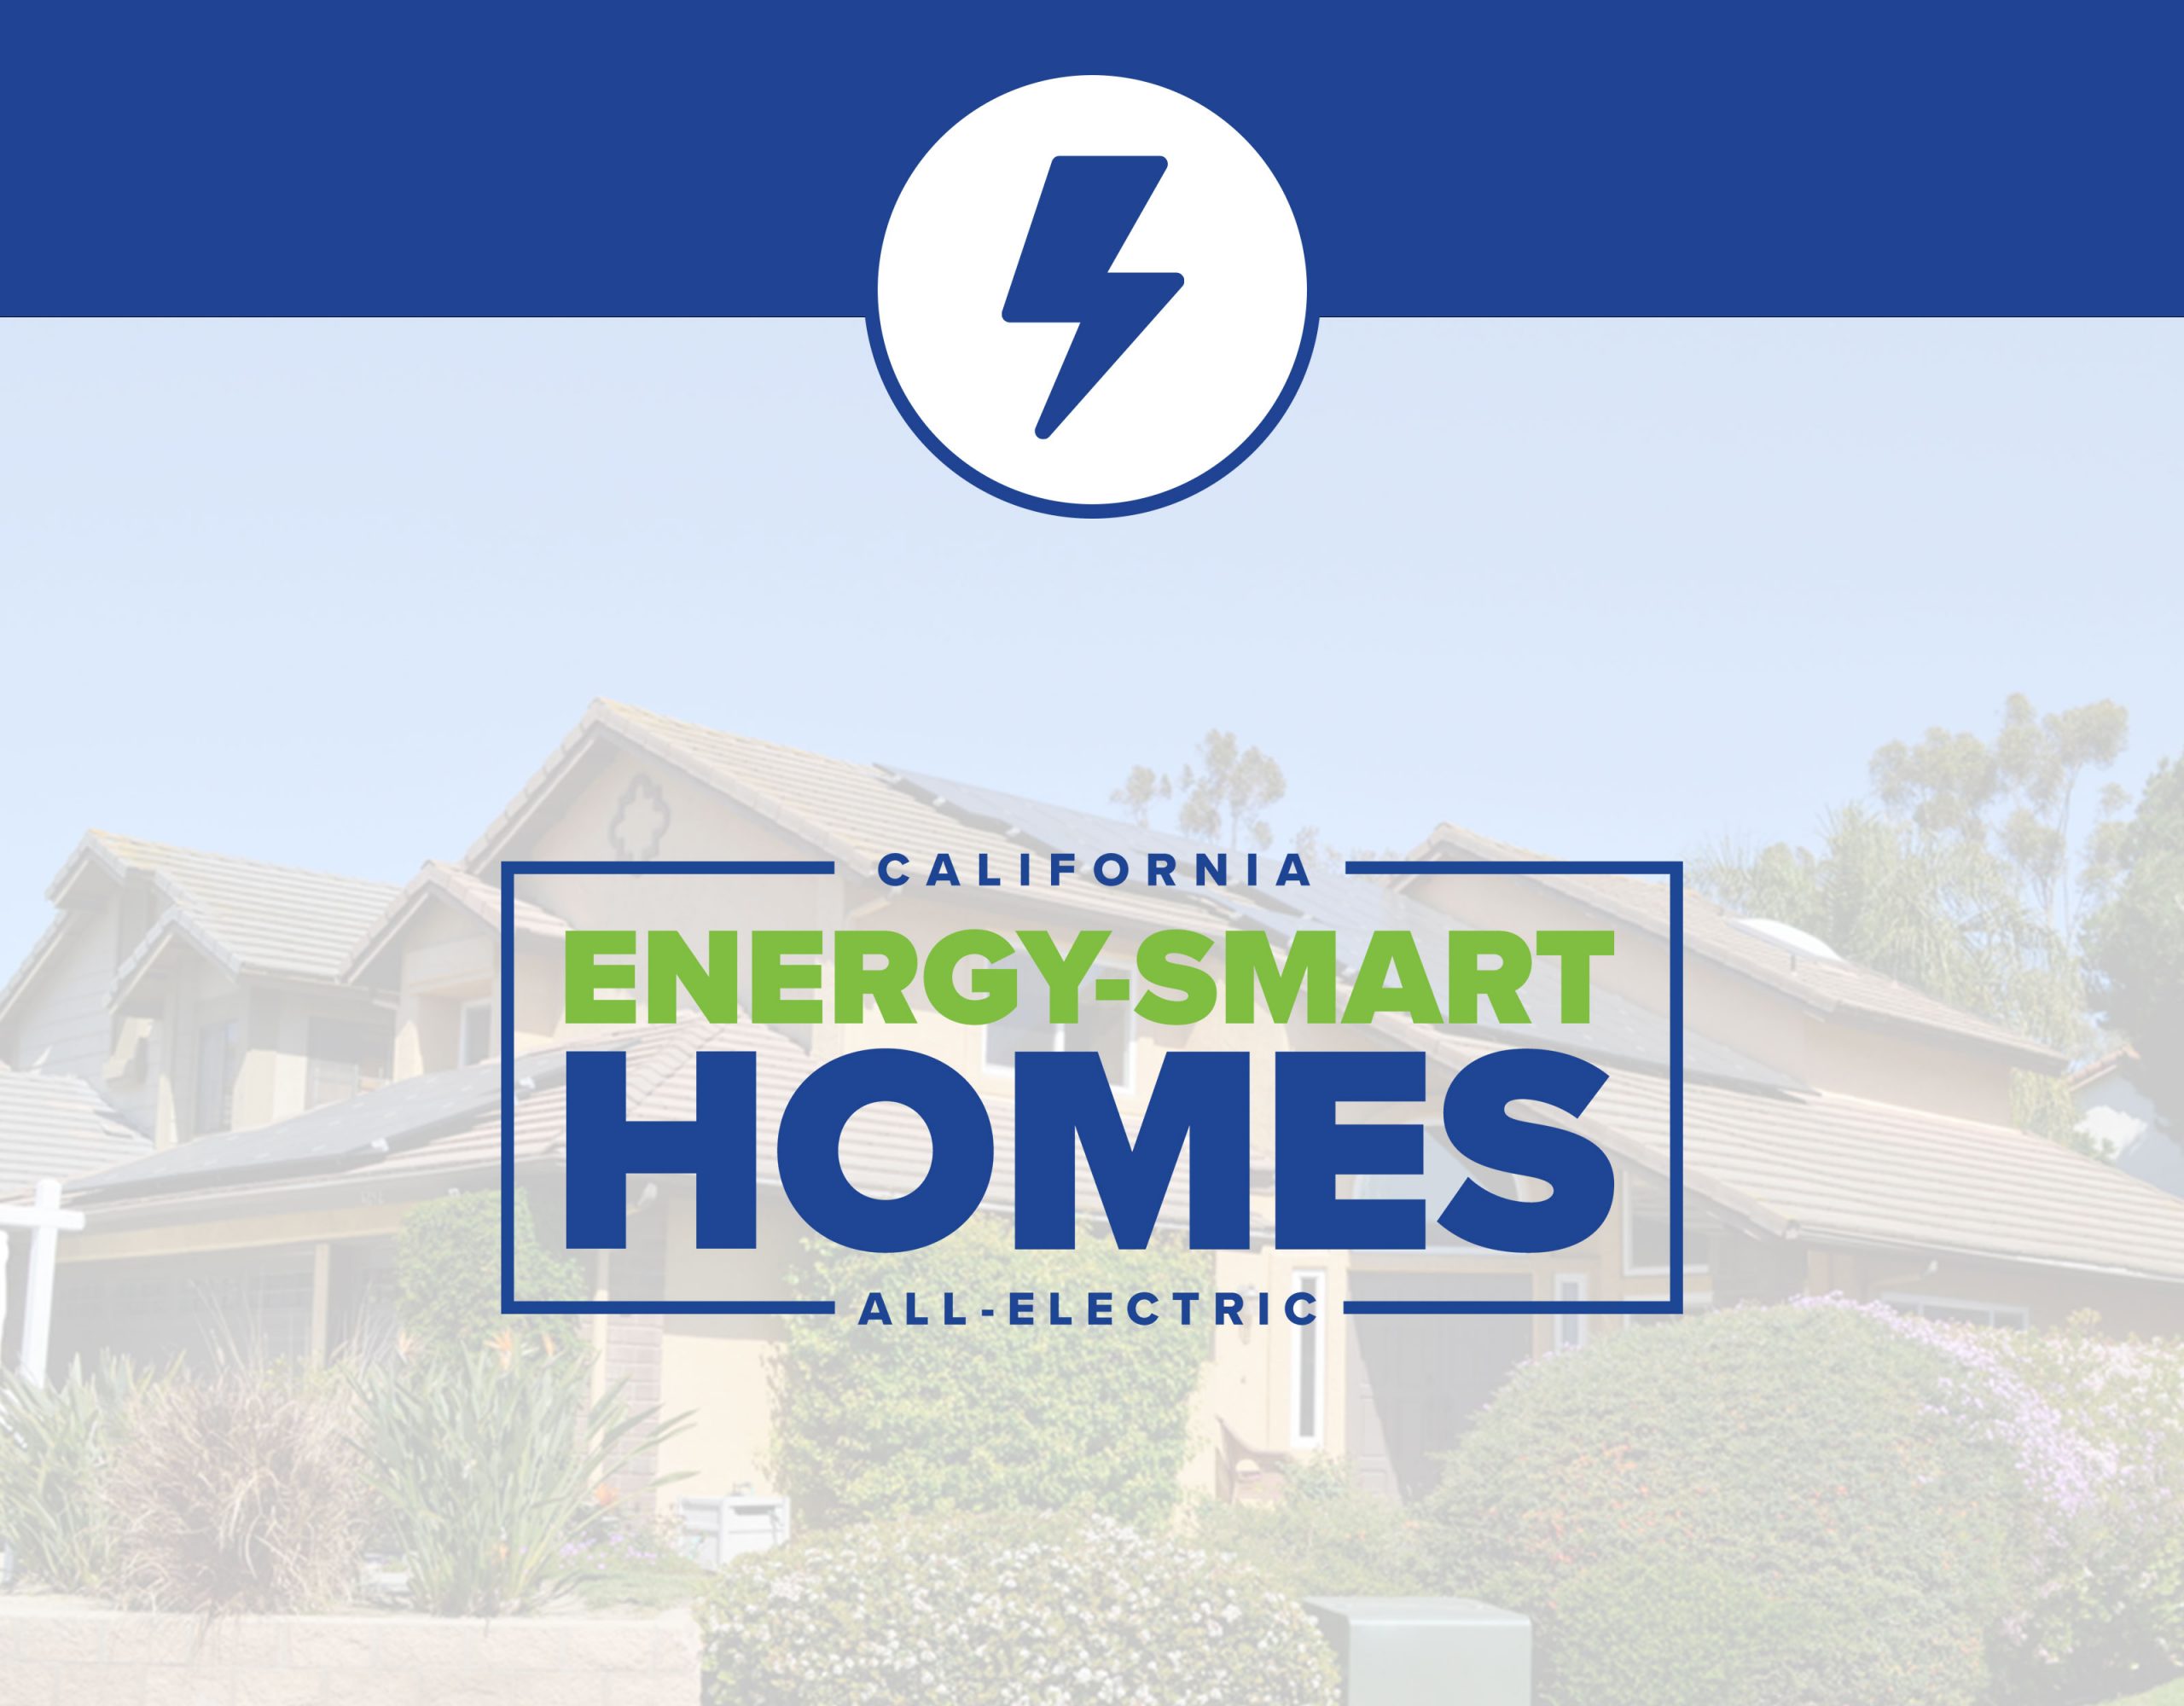 Volt Icon overlayed on a house with a banner California Smart All Electric Homes text